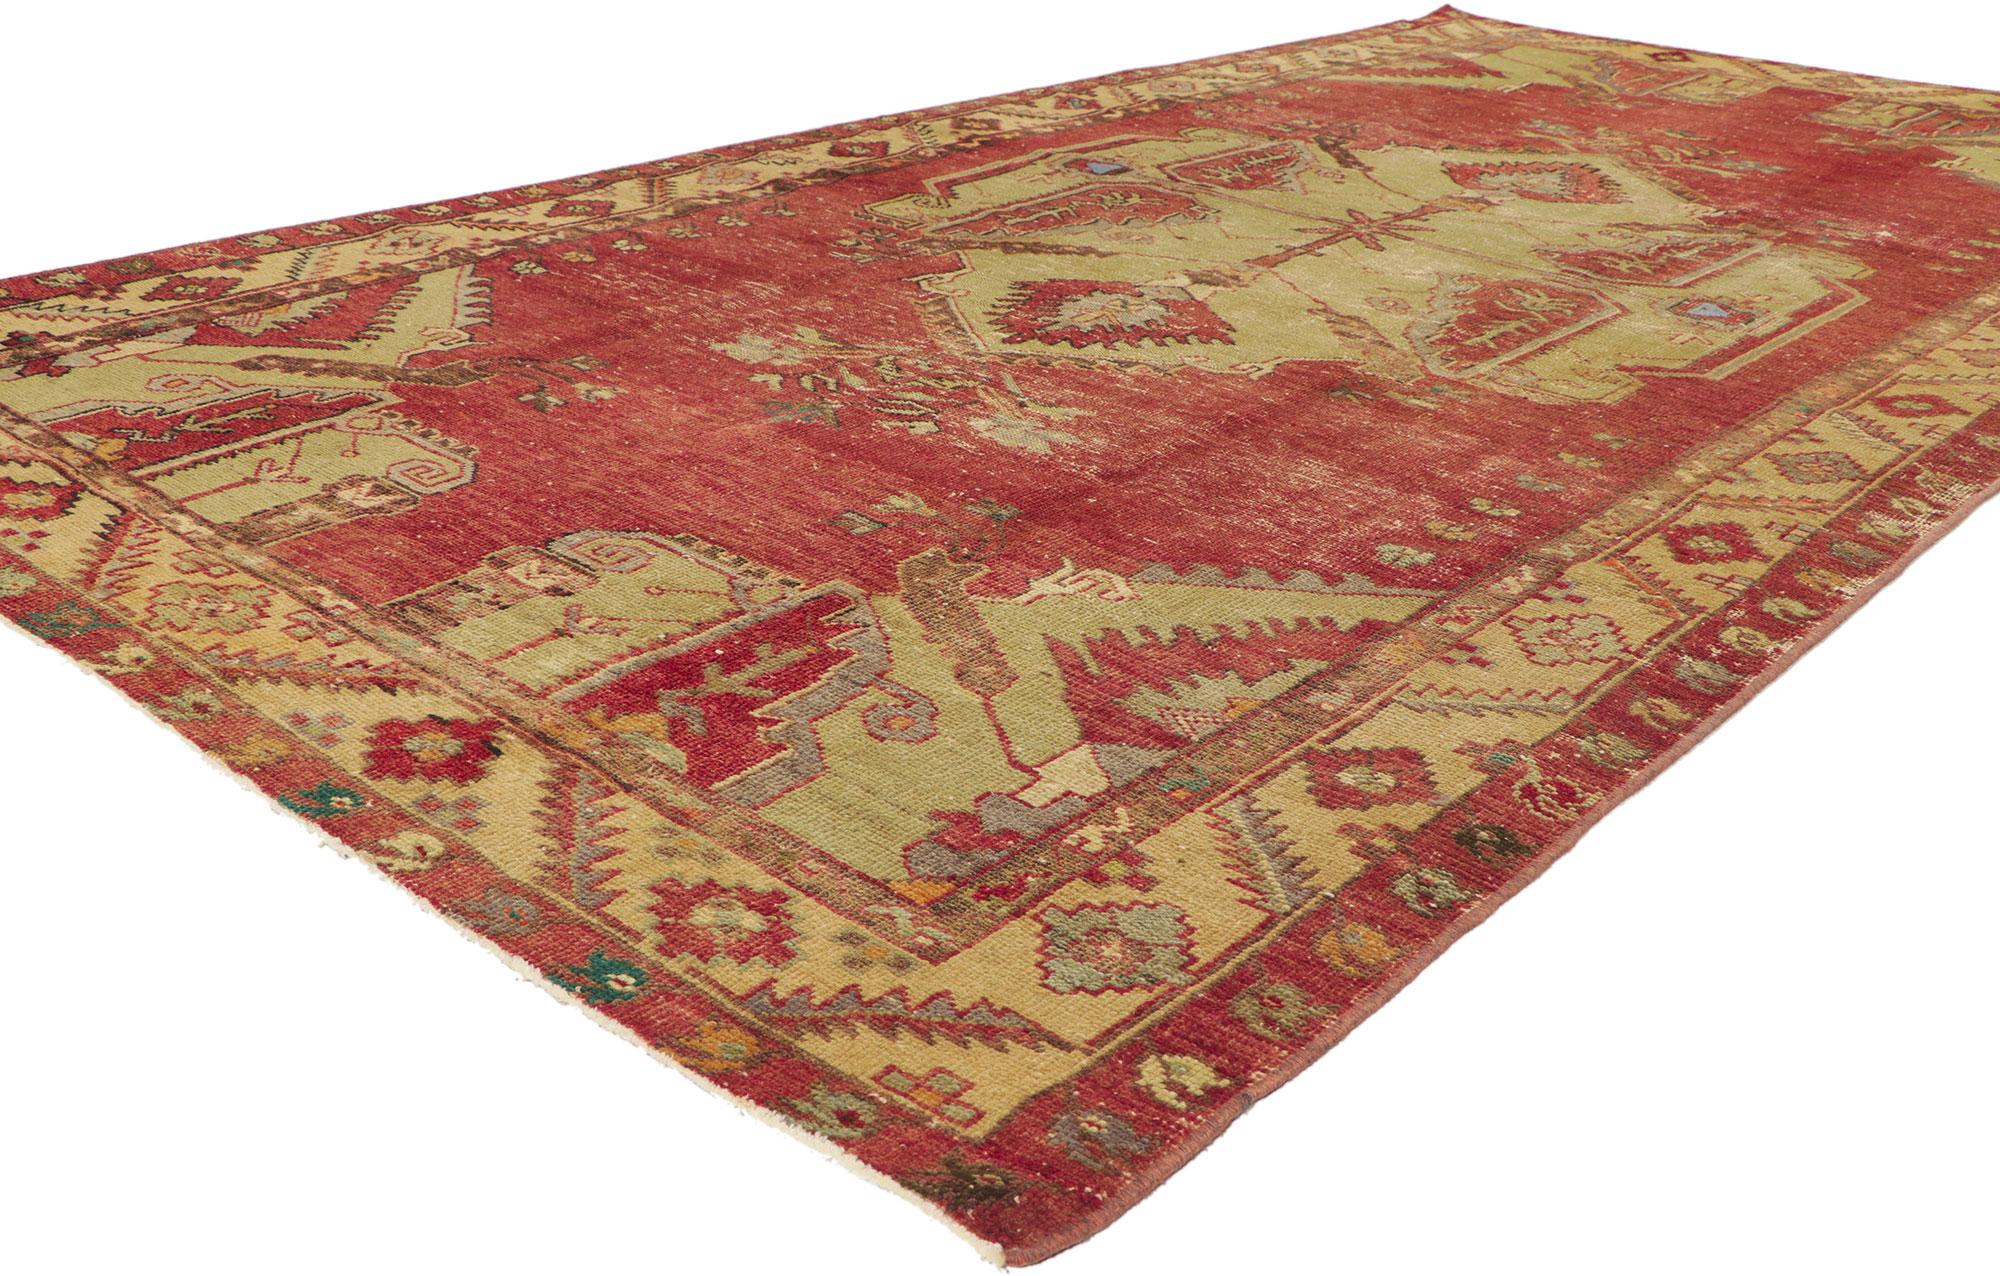 51727 Vintage Turkish oushak rug, 05'03 x 10'04.
Emanating rustic sensibility with incredible detail and texture, this hand knotted wool vintage Turkish Oushak rug is a captivating vision of woven beauty. The eye-catching medallion design and